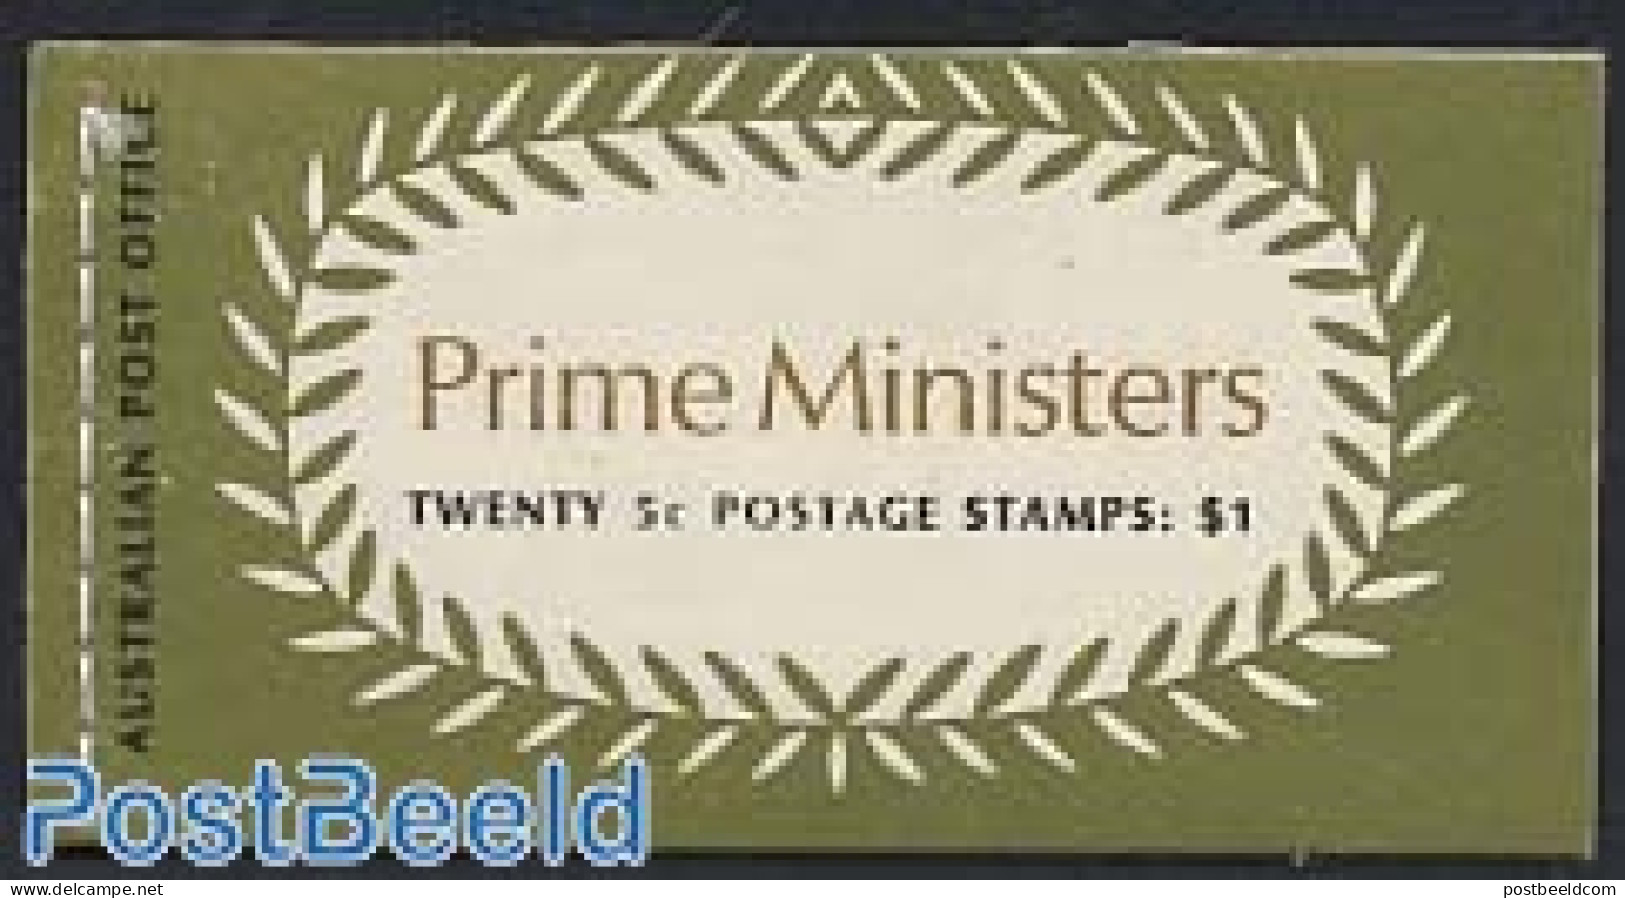 Australia 1969 Prime Ministers Booklet With 5x4v, Mint NH, History - Politicians - Stamp Booklets - Ongebruikt